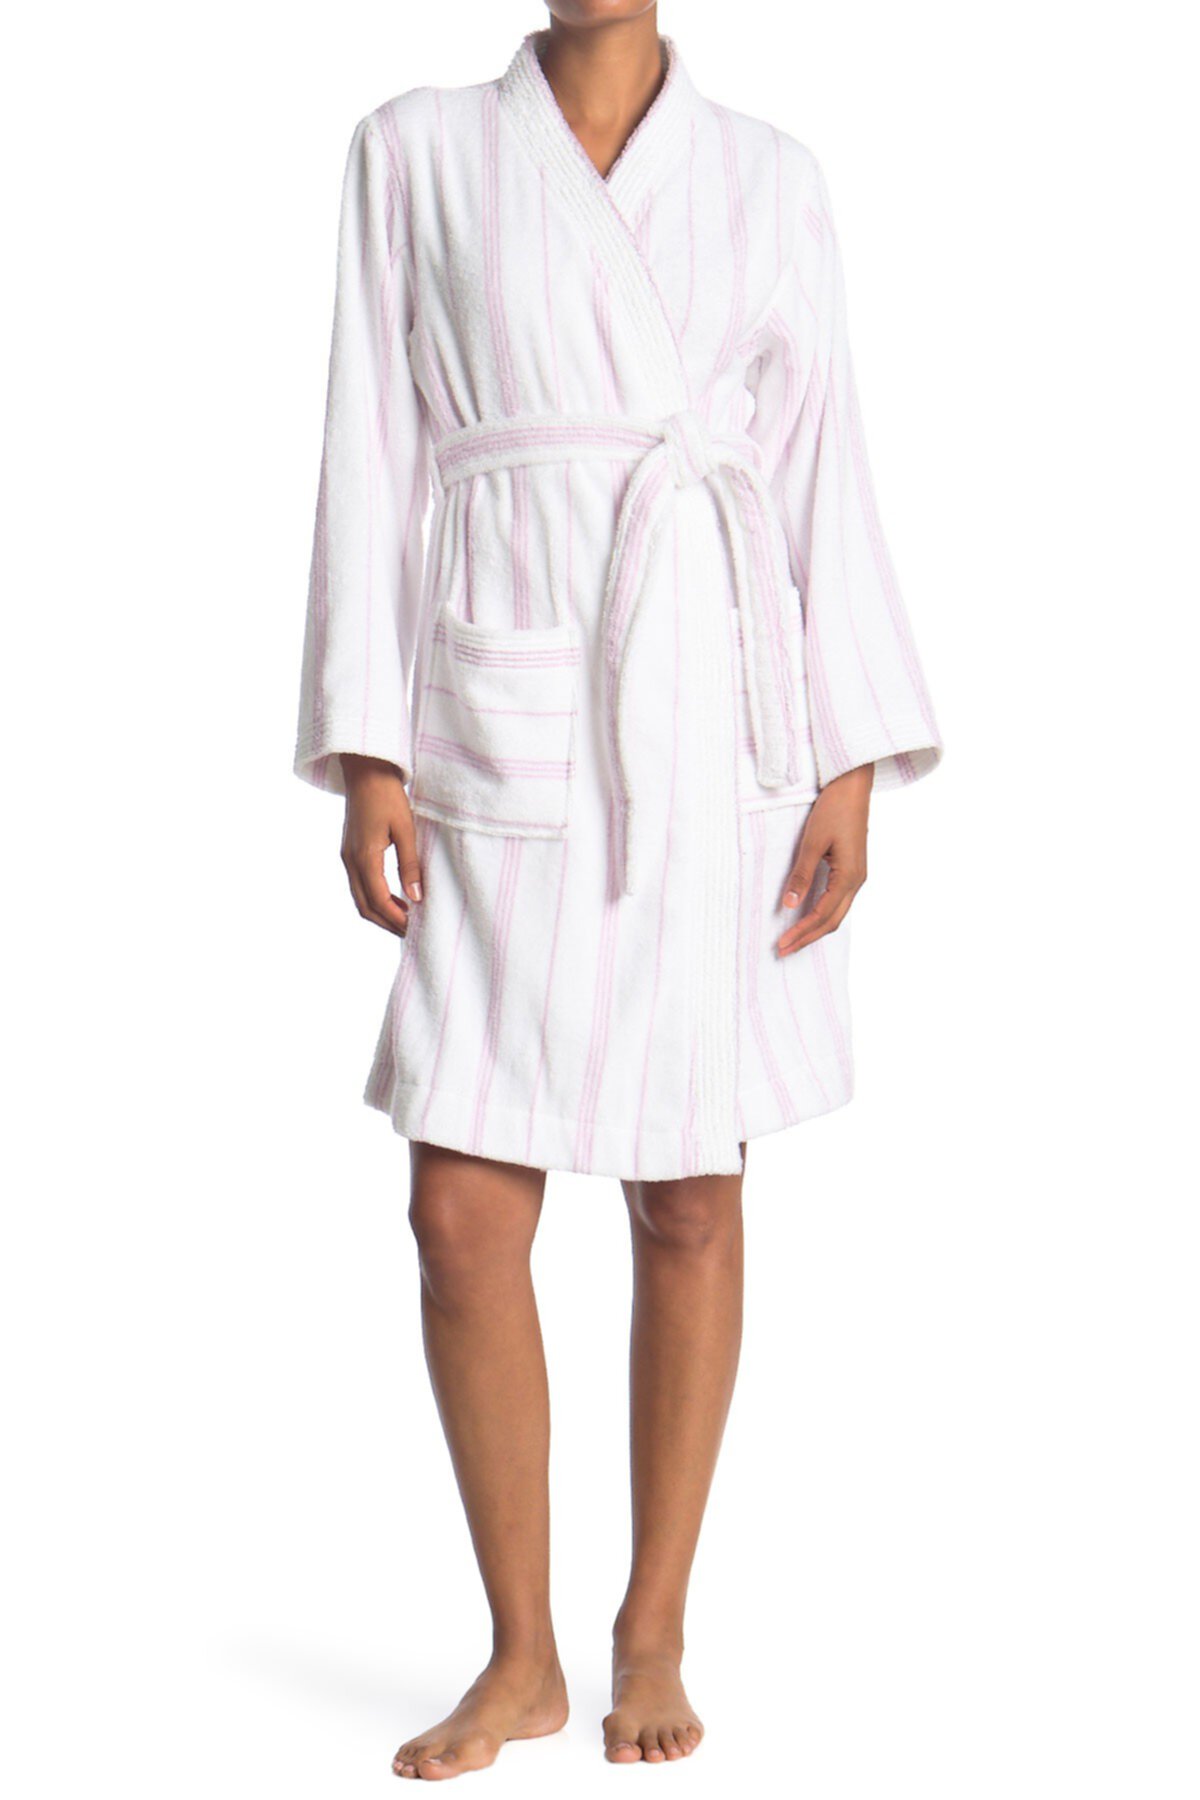 Lorie Terry Short Robe UGG